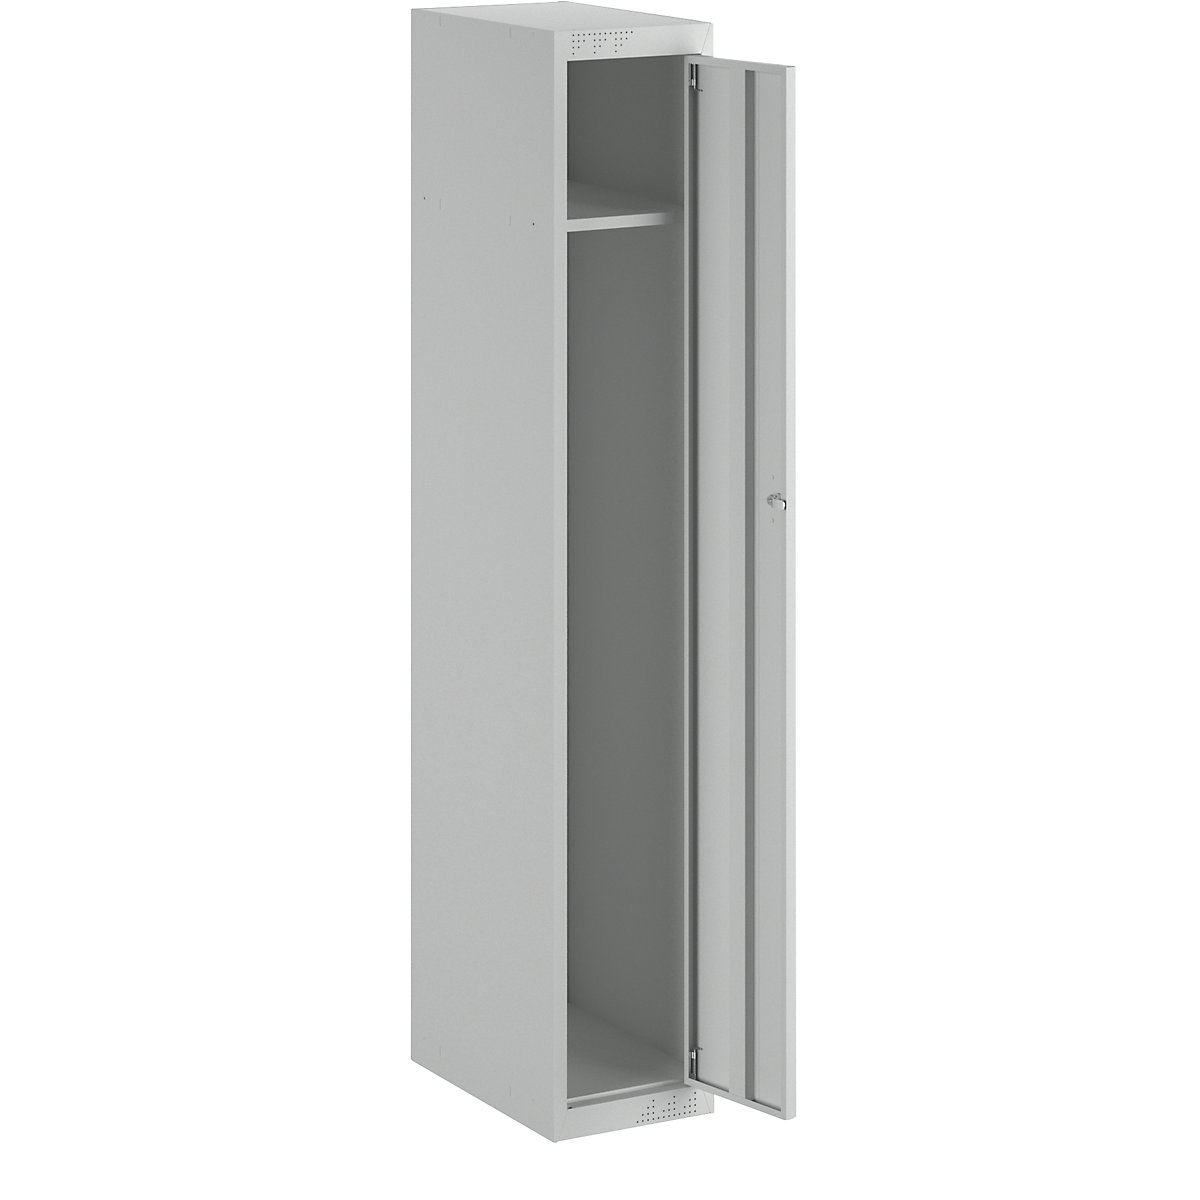 Cloakroom locker system – eurokraft basic, with standard and extension modules, HxWxD 1800 x 300 x 500 mm, 1 hat shelf, 1 clothes rail, light grey, extension module-12